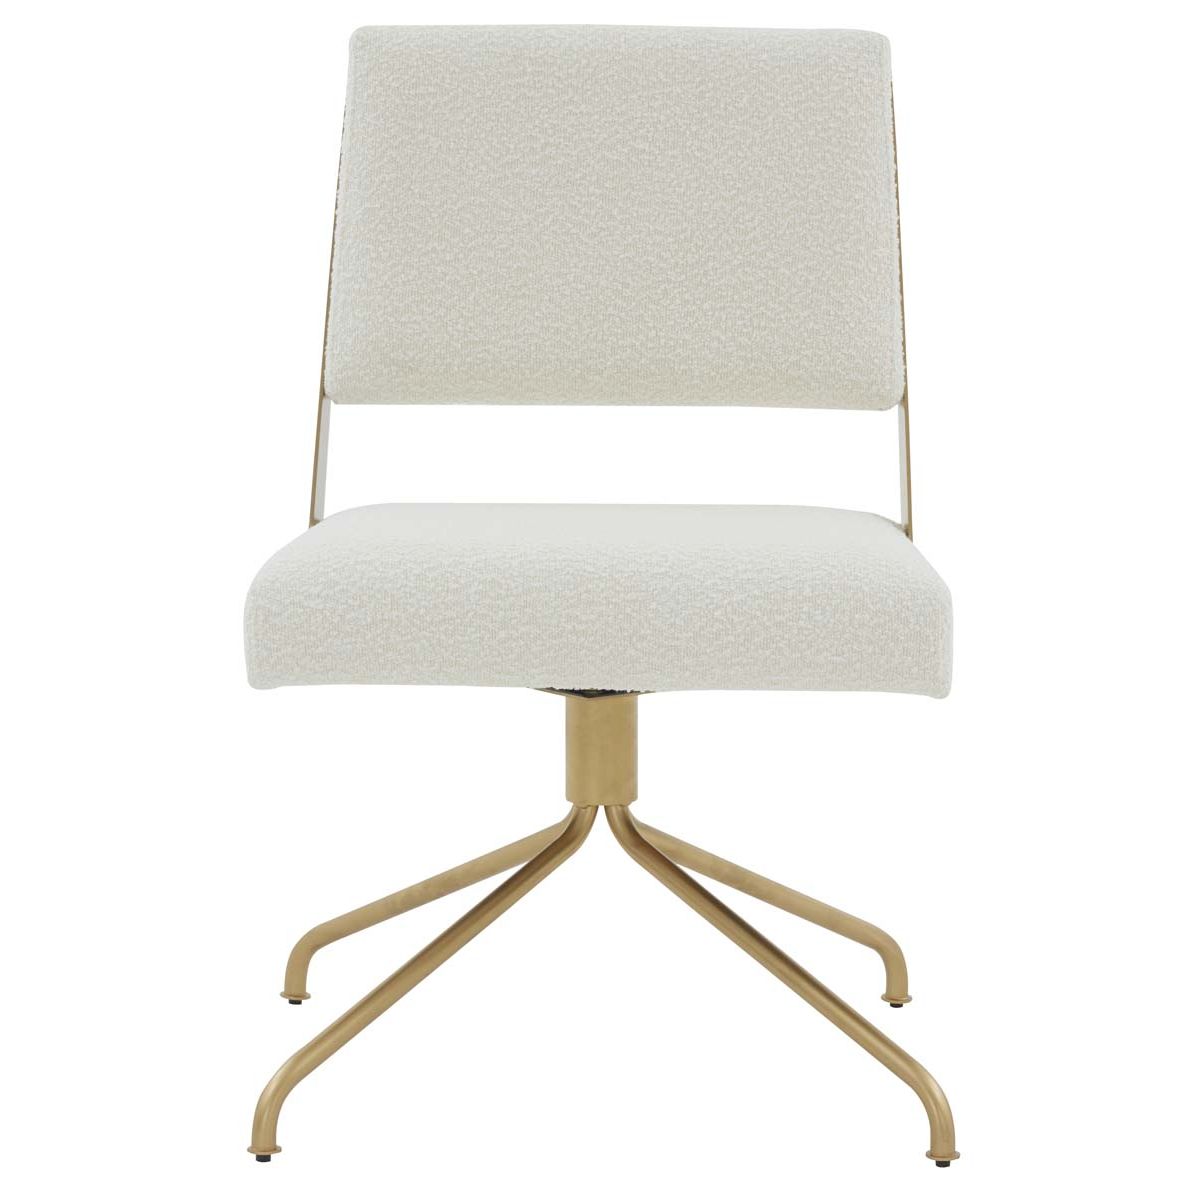 Safavieh Couture Emmeline Swivel Office Chair - Ivory / Gold